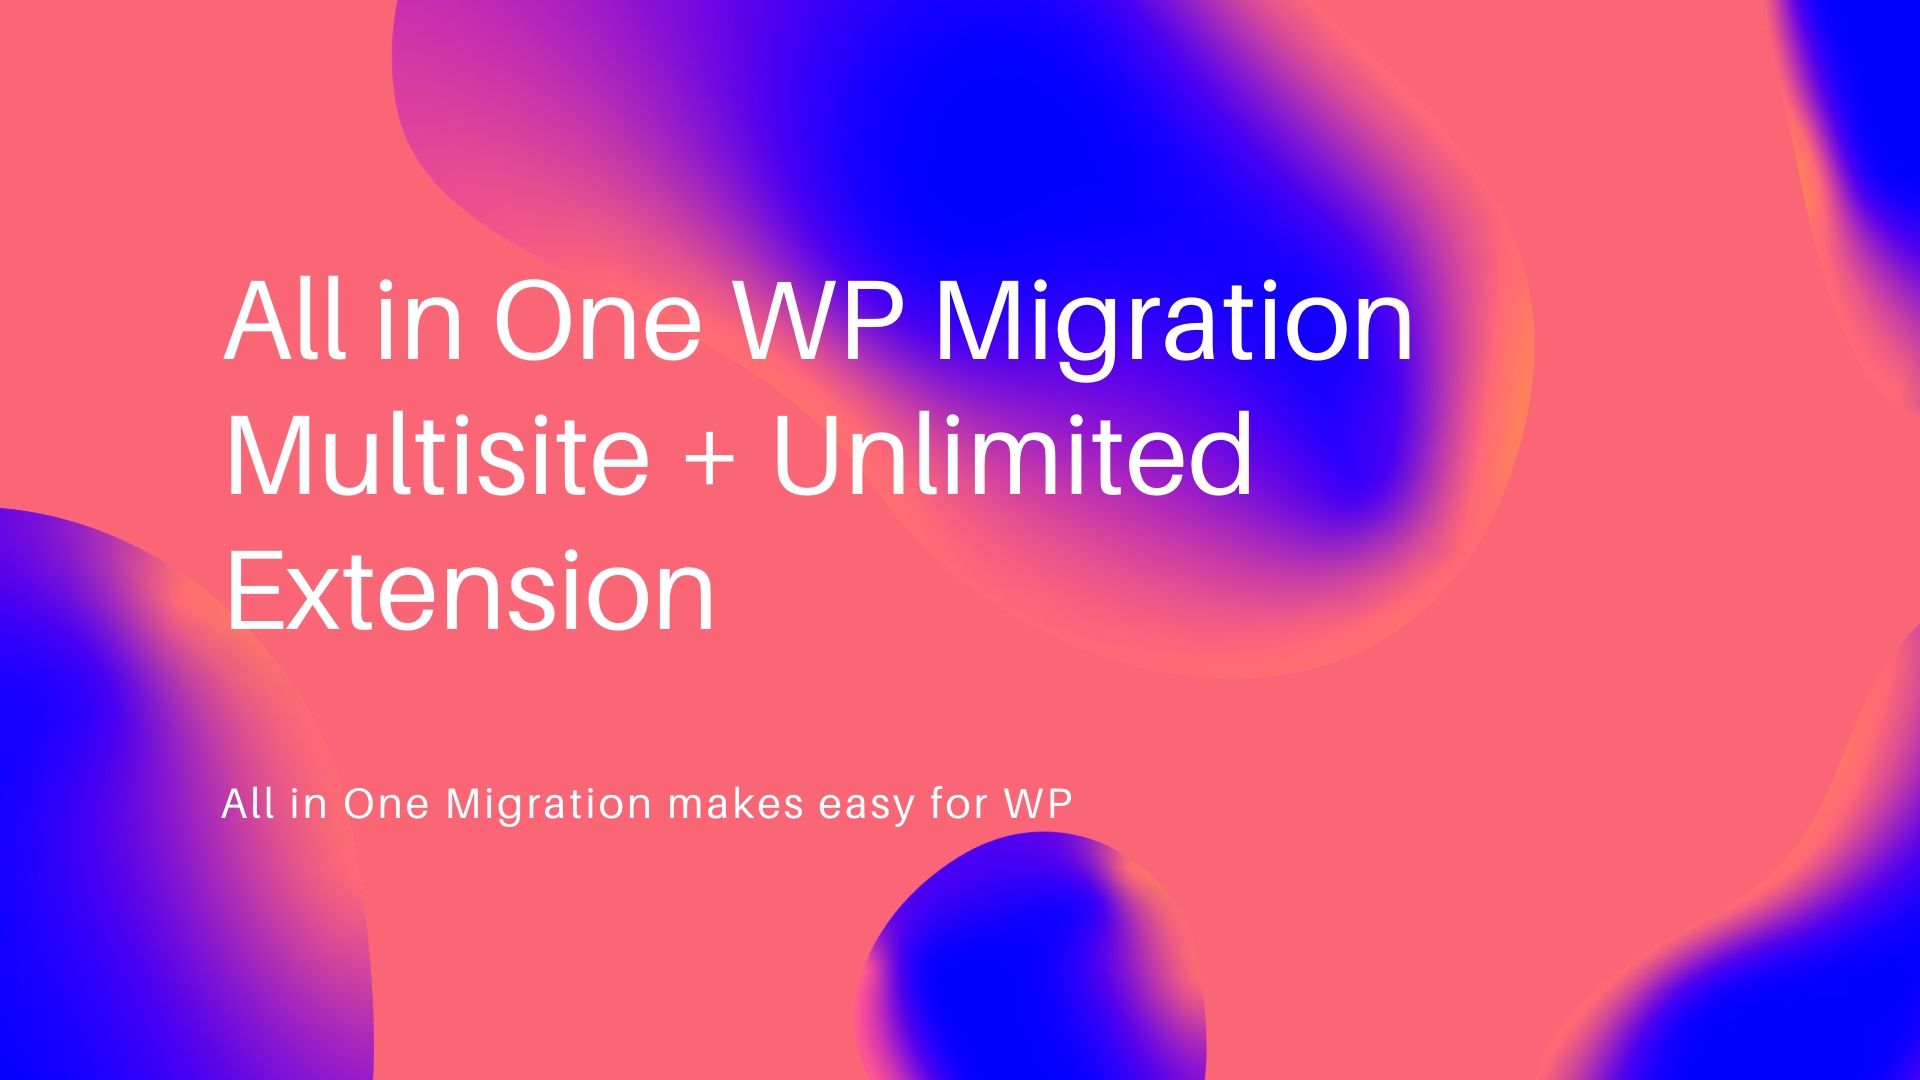 All in One WP Migration Multisite + Unlimited Extension